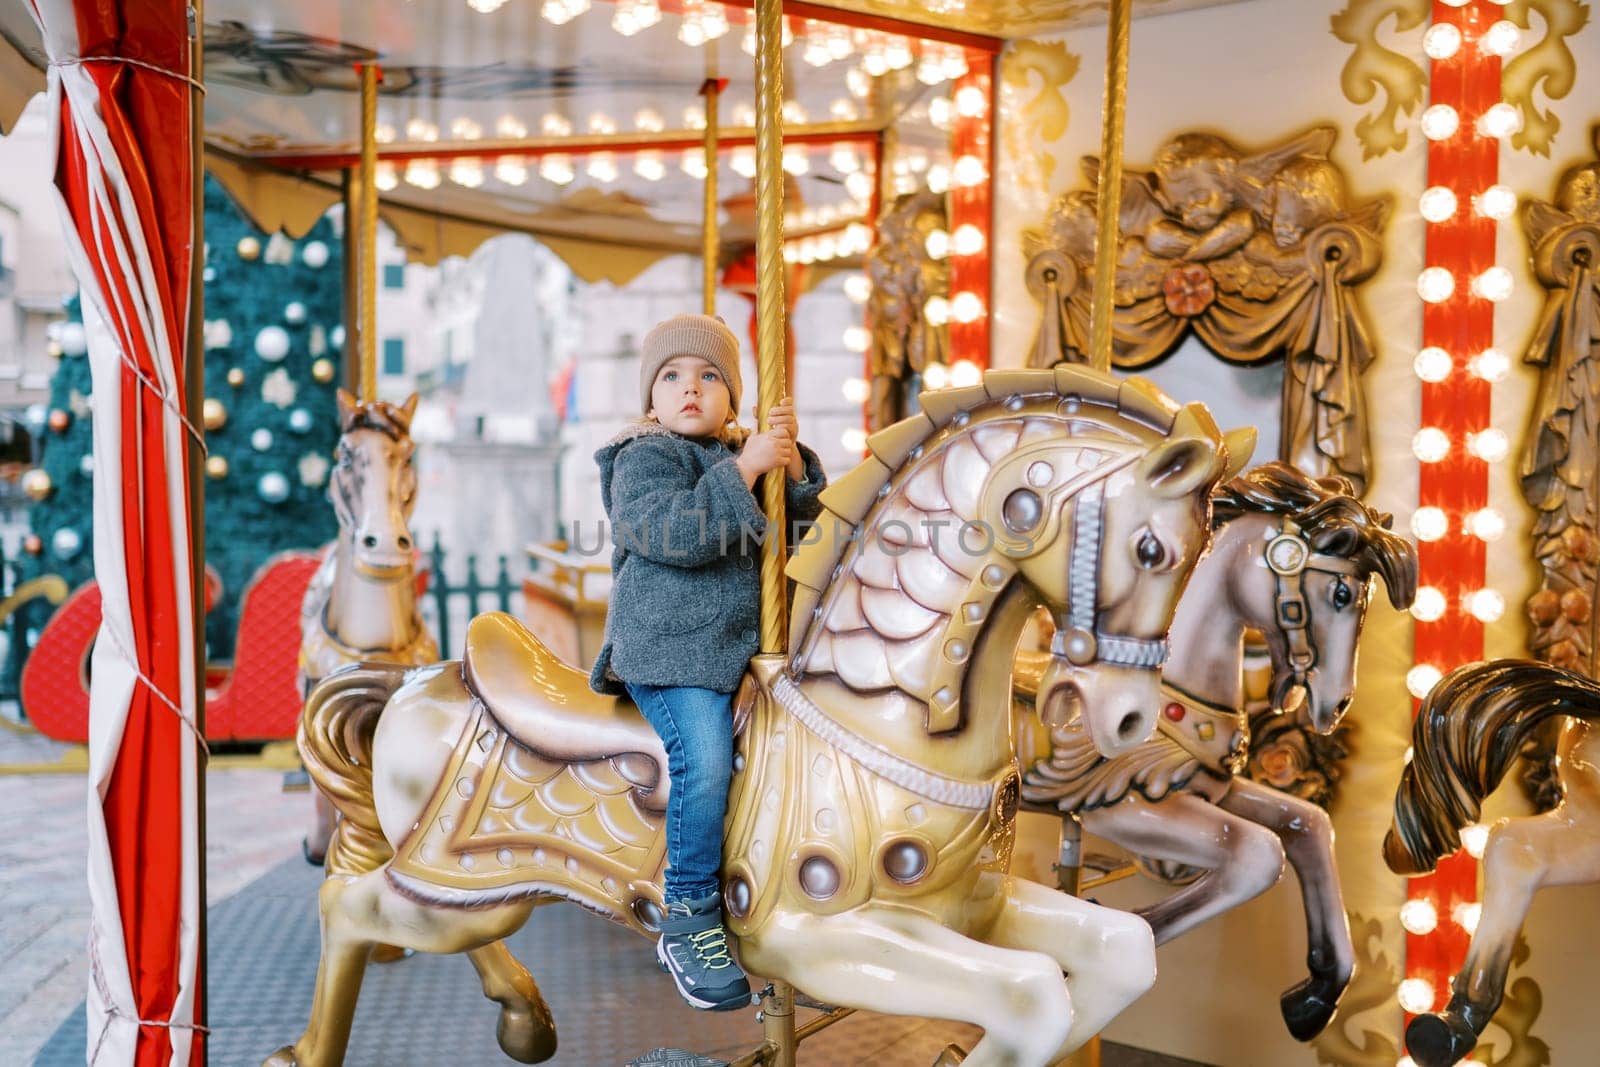 Little girl rides a toy horse on a carousel in the square near a decorated Christmas tree. High quality photo